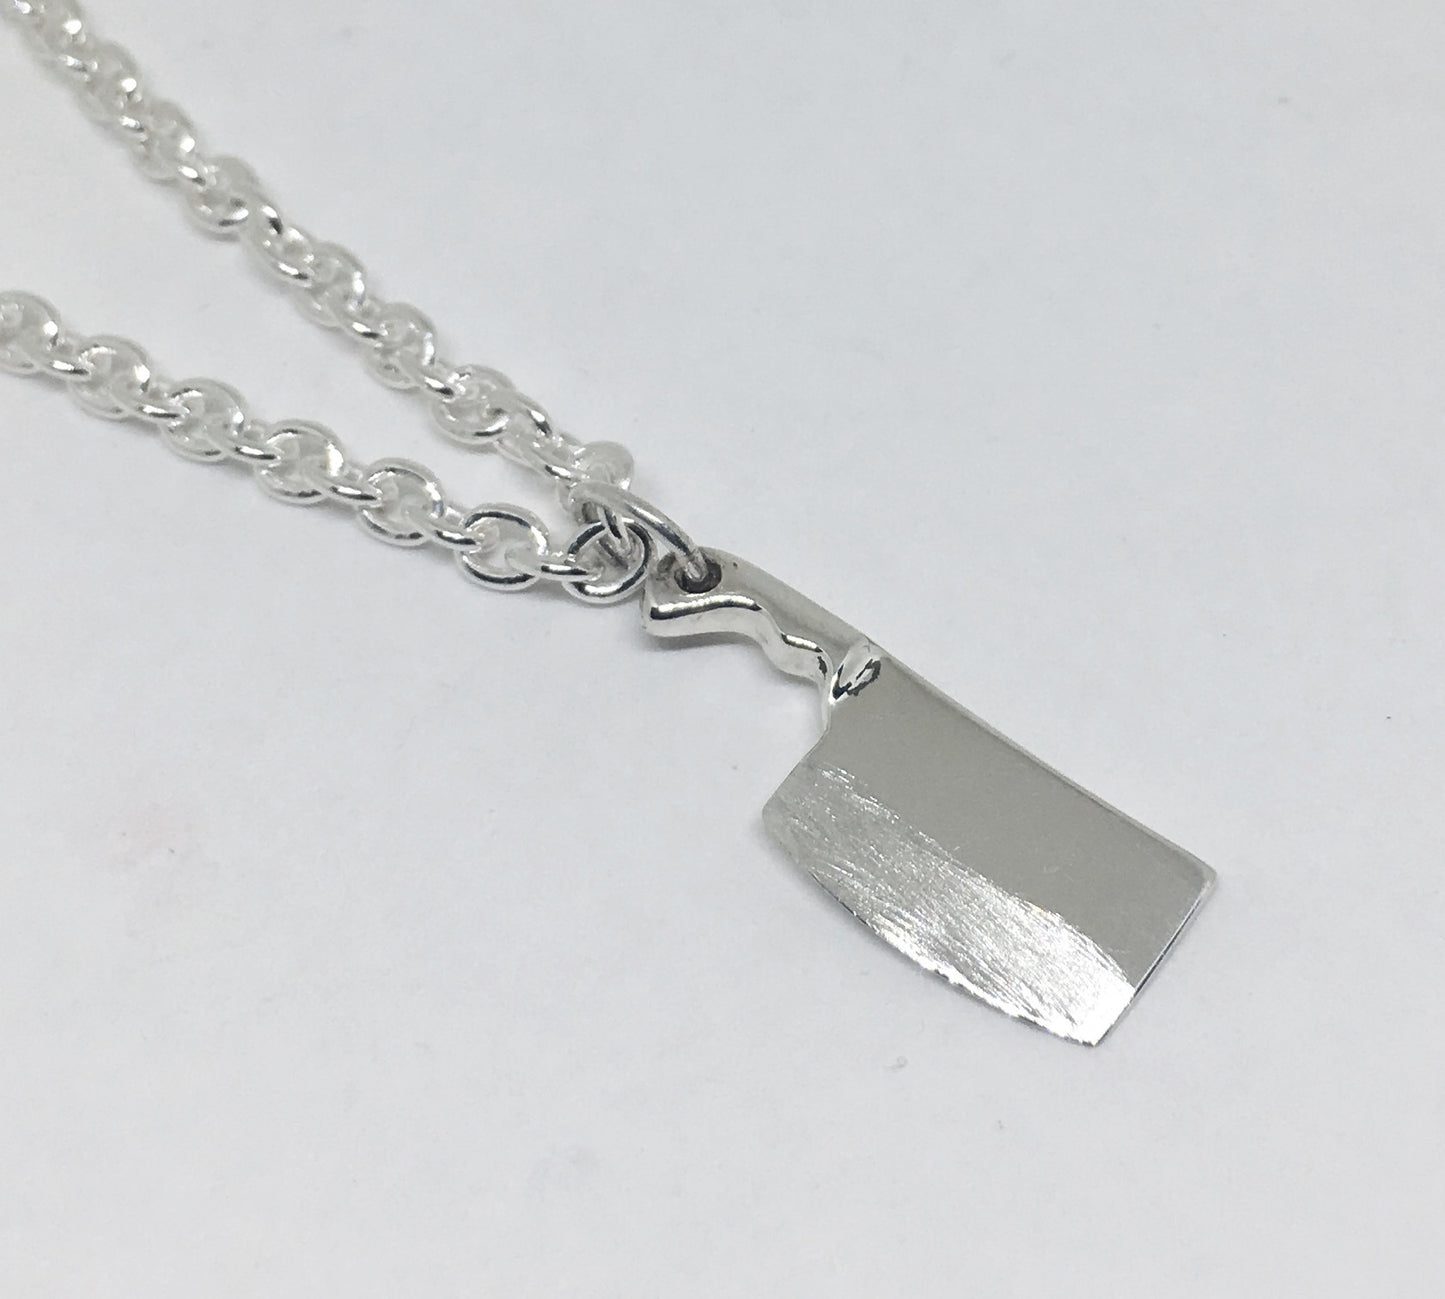 Chef Cleaver Knife Pendant Necklace in Sterling Silver with 3mm Chain